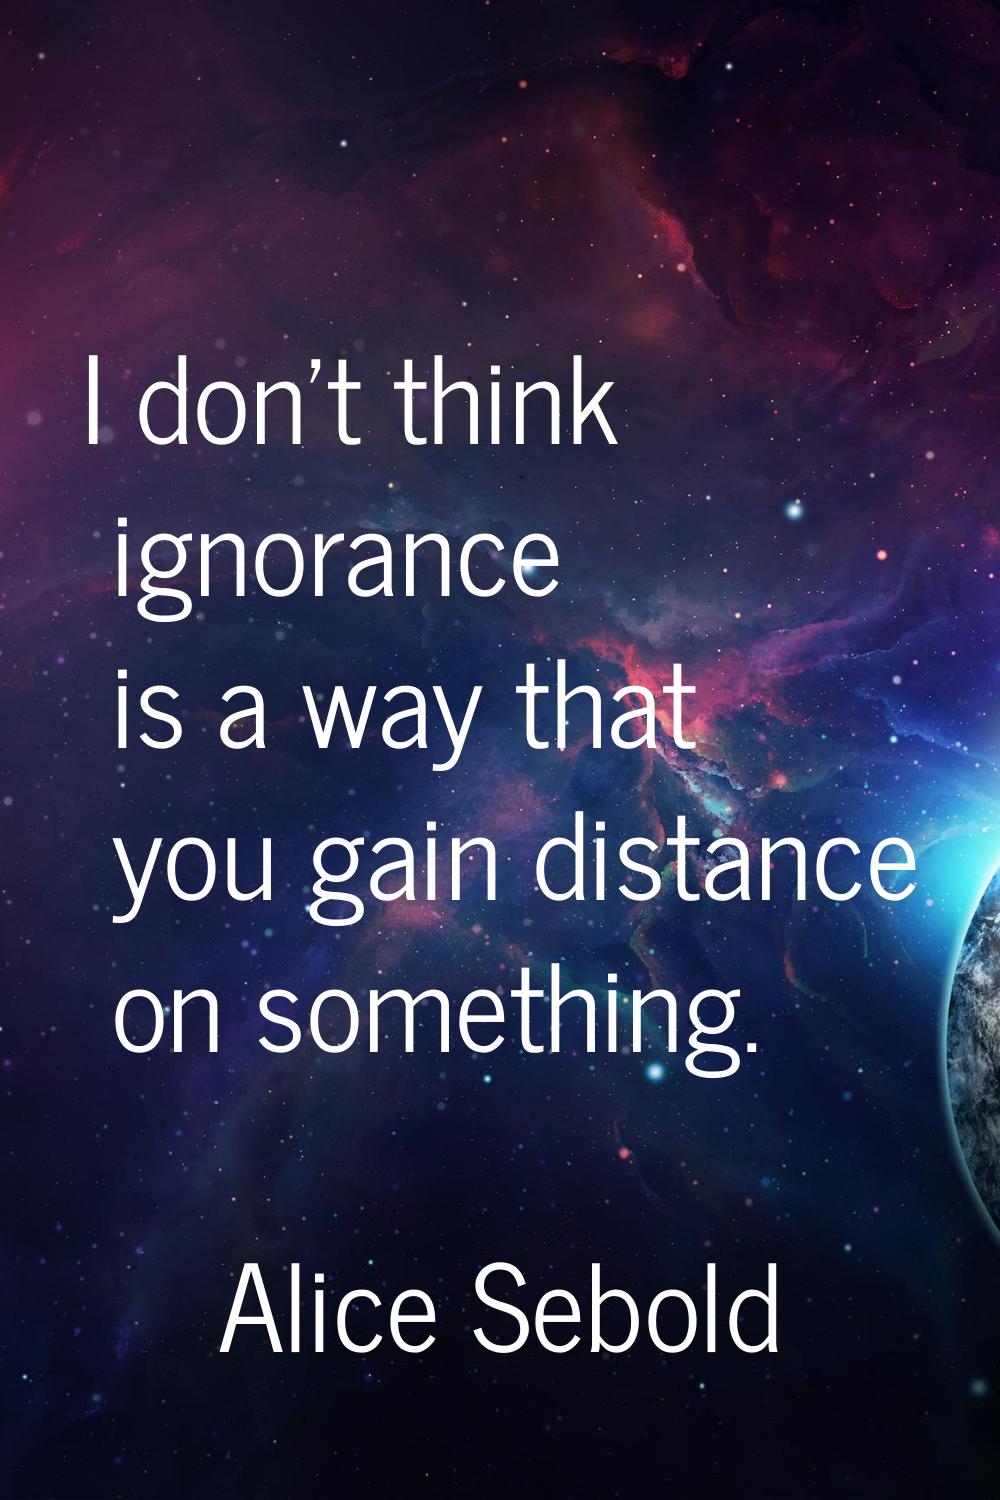 I don't think ignorance is a way that you gain distance on something.